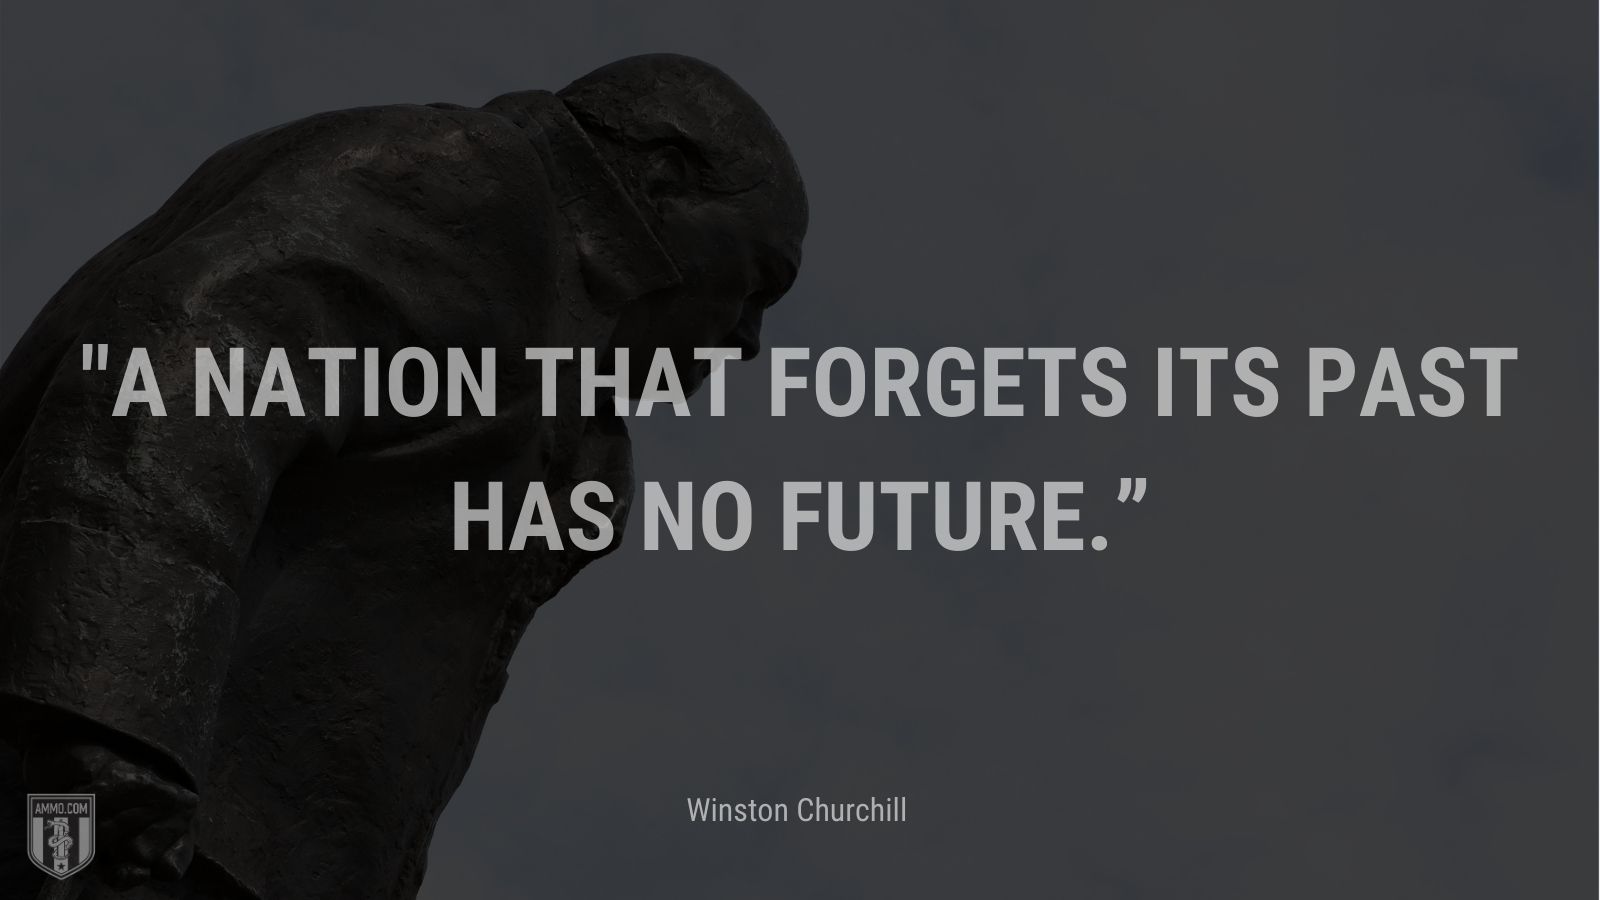 “A nation that forgets its past has no future.” - Winston Churchill